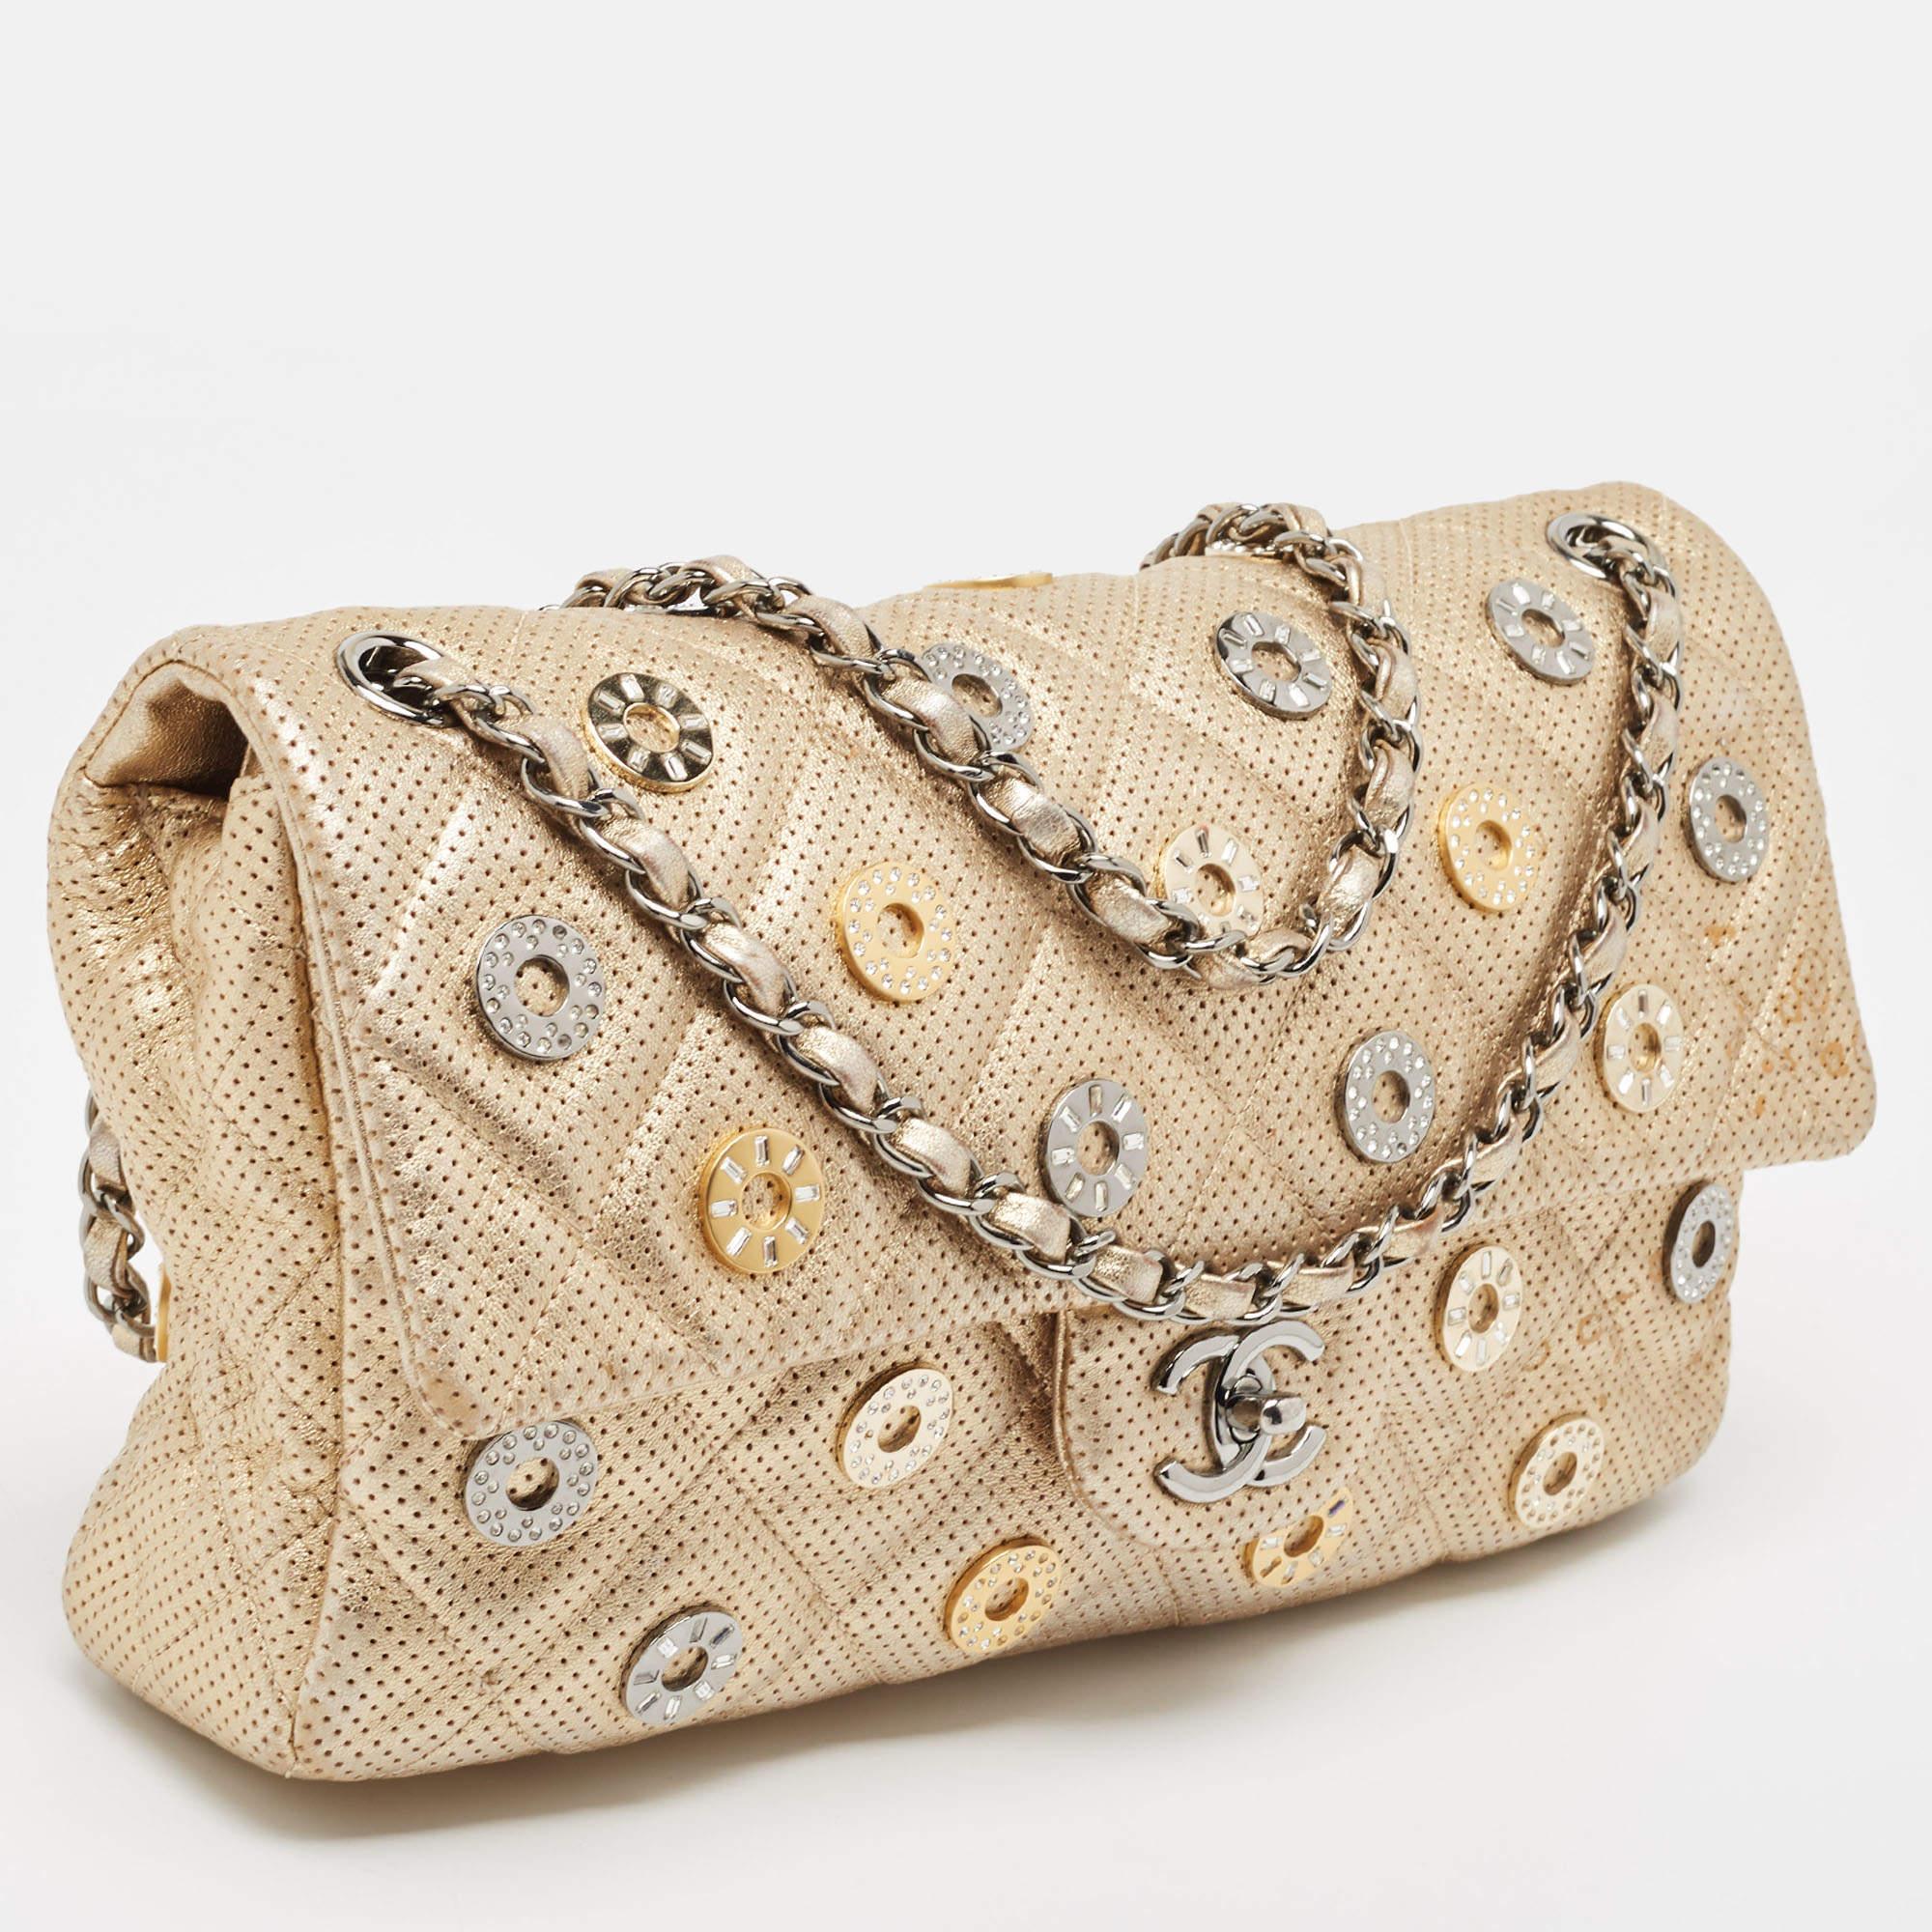 Women's Chanel Gold Quilted Perforated Leather Embellished East/West Classic Flap Bag